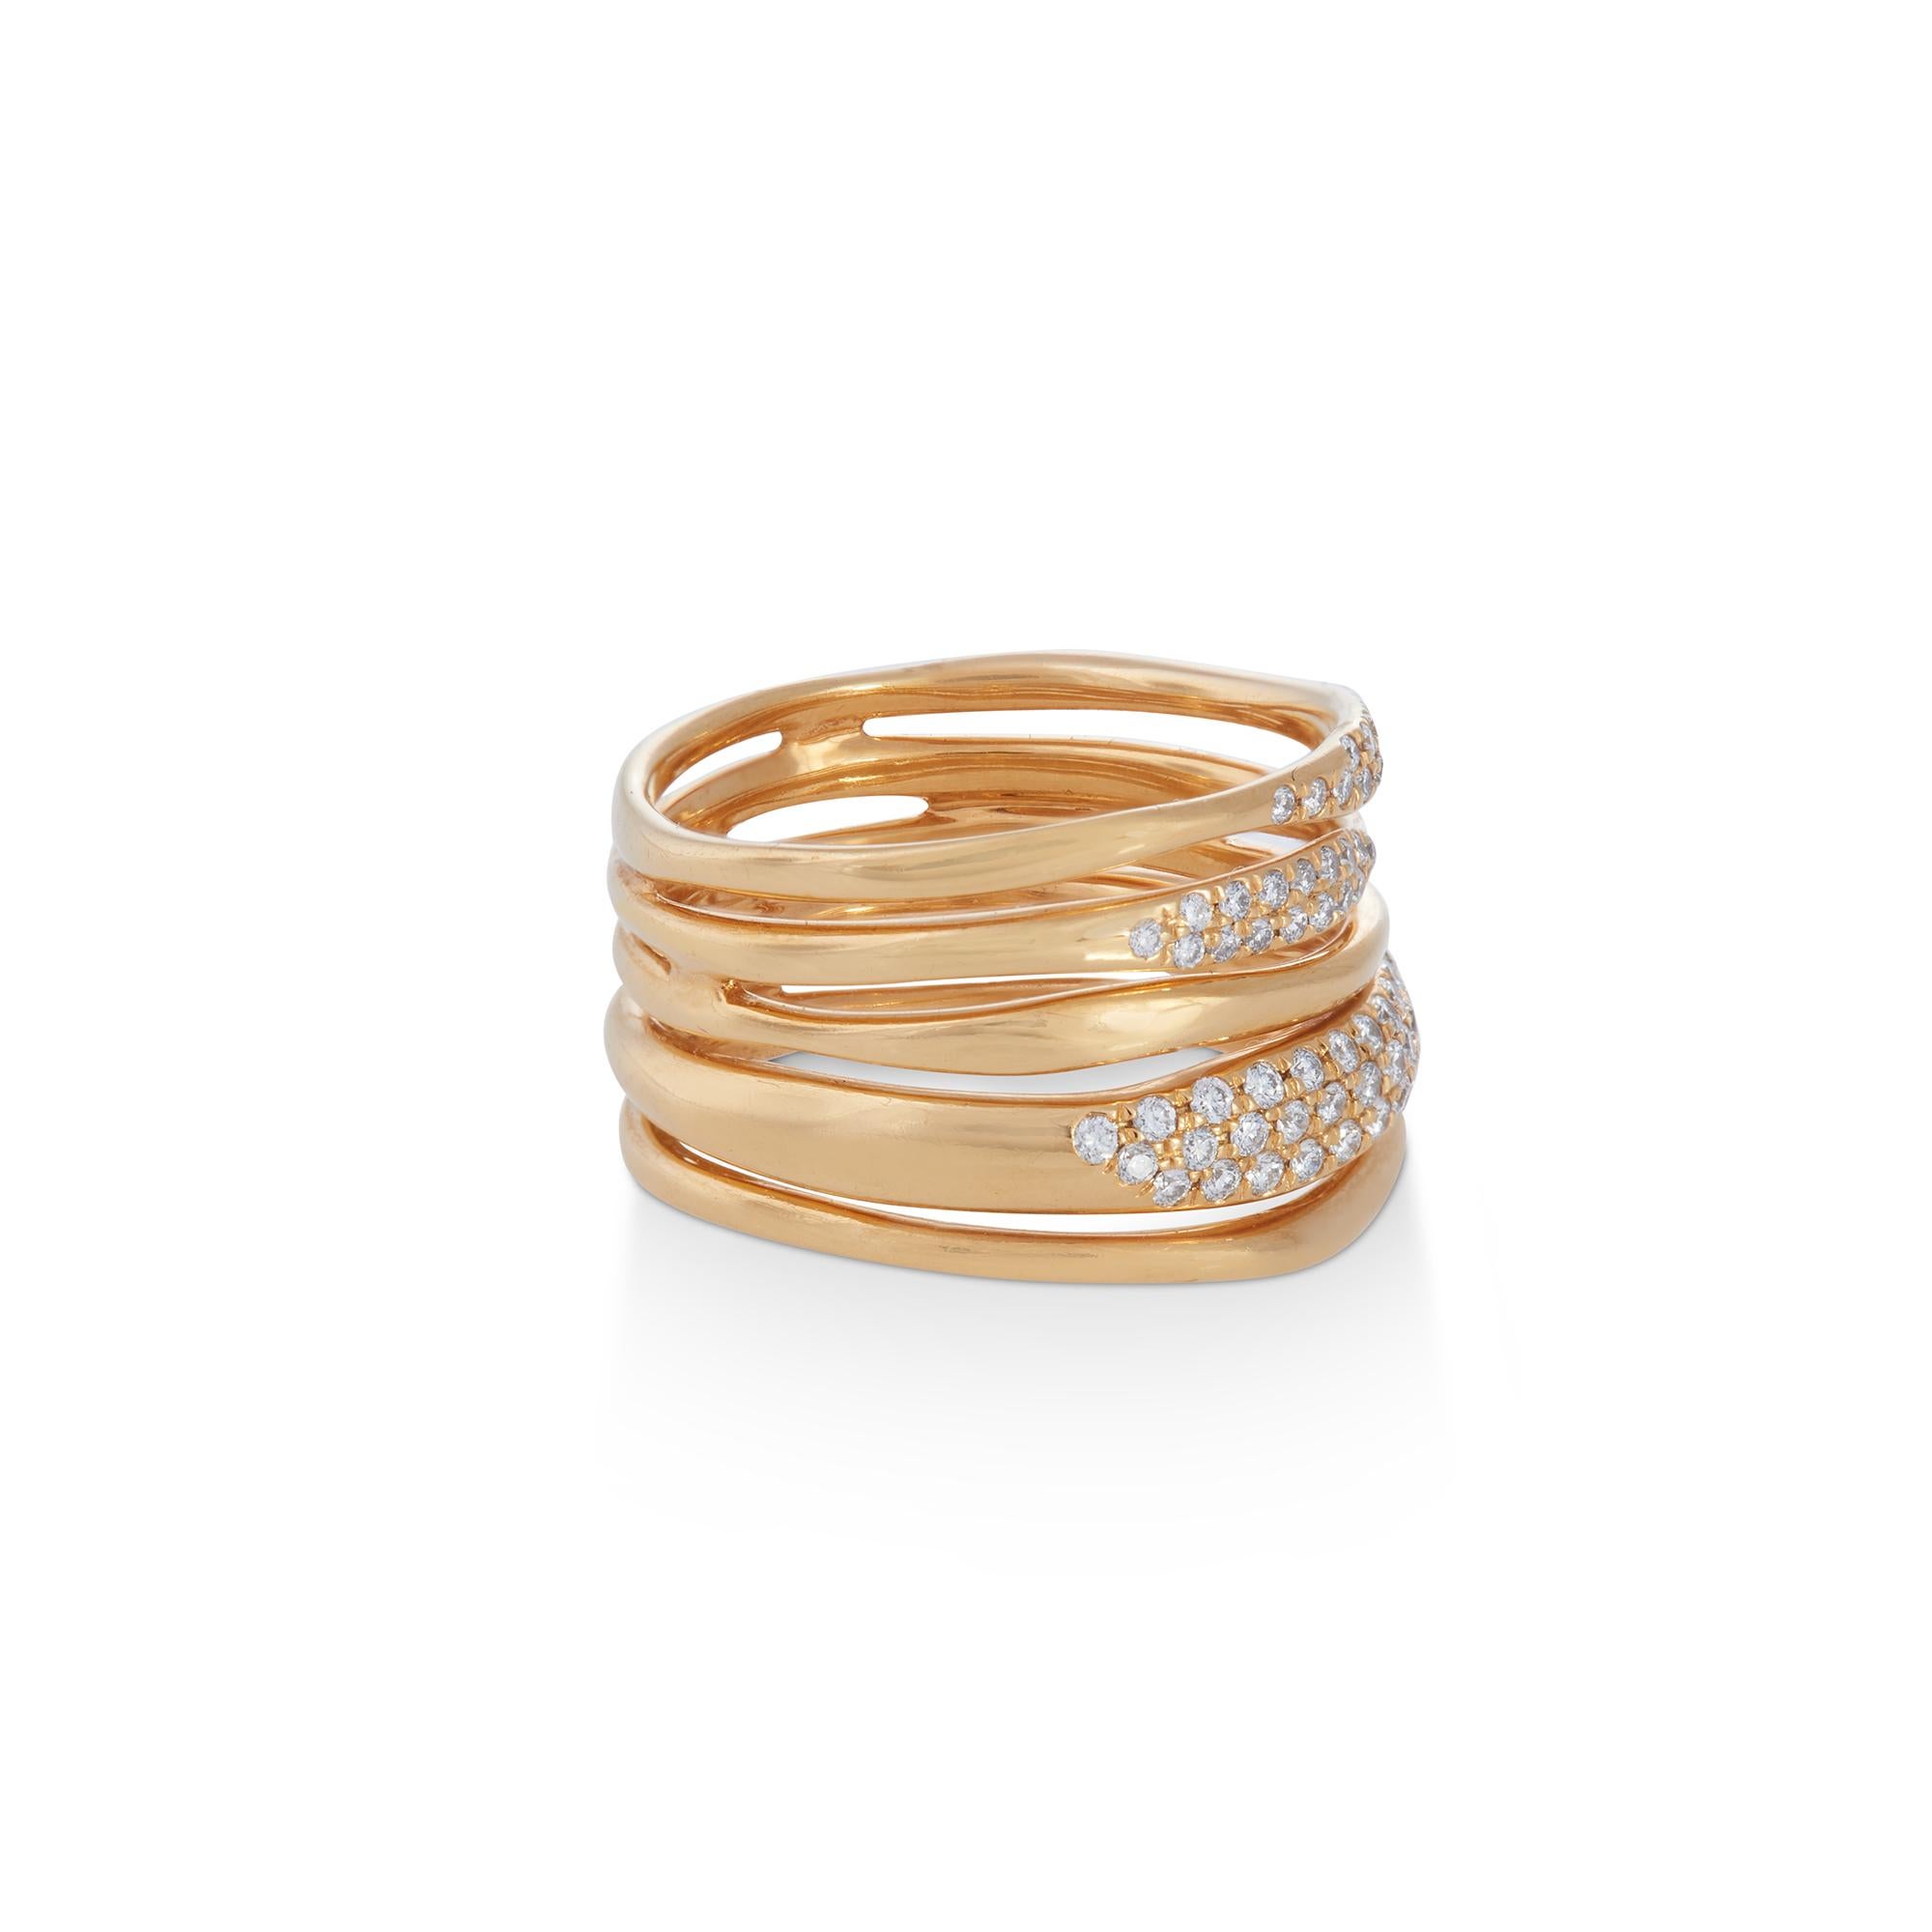 Authentic Ippolita 'Squiggle' ring from the Stardust collection crafted in 18 karat yellow gold.  The ring features five stacked bands, three of which are set with round brilliant diamonds for an estimated .33 carats total weight.  Size 6.  Signed